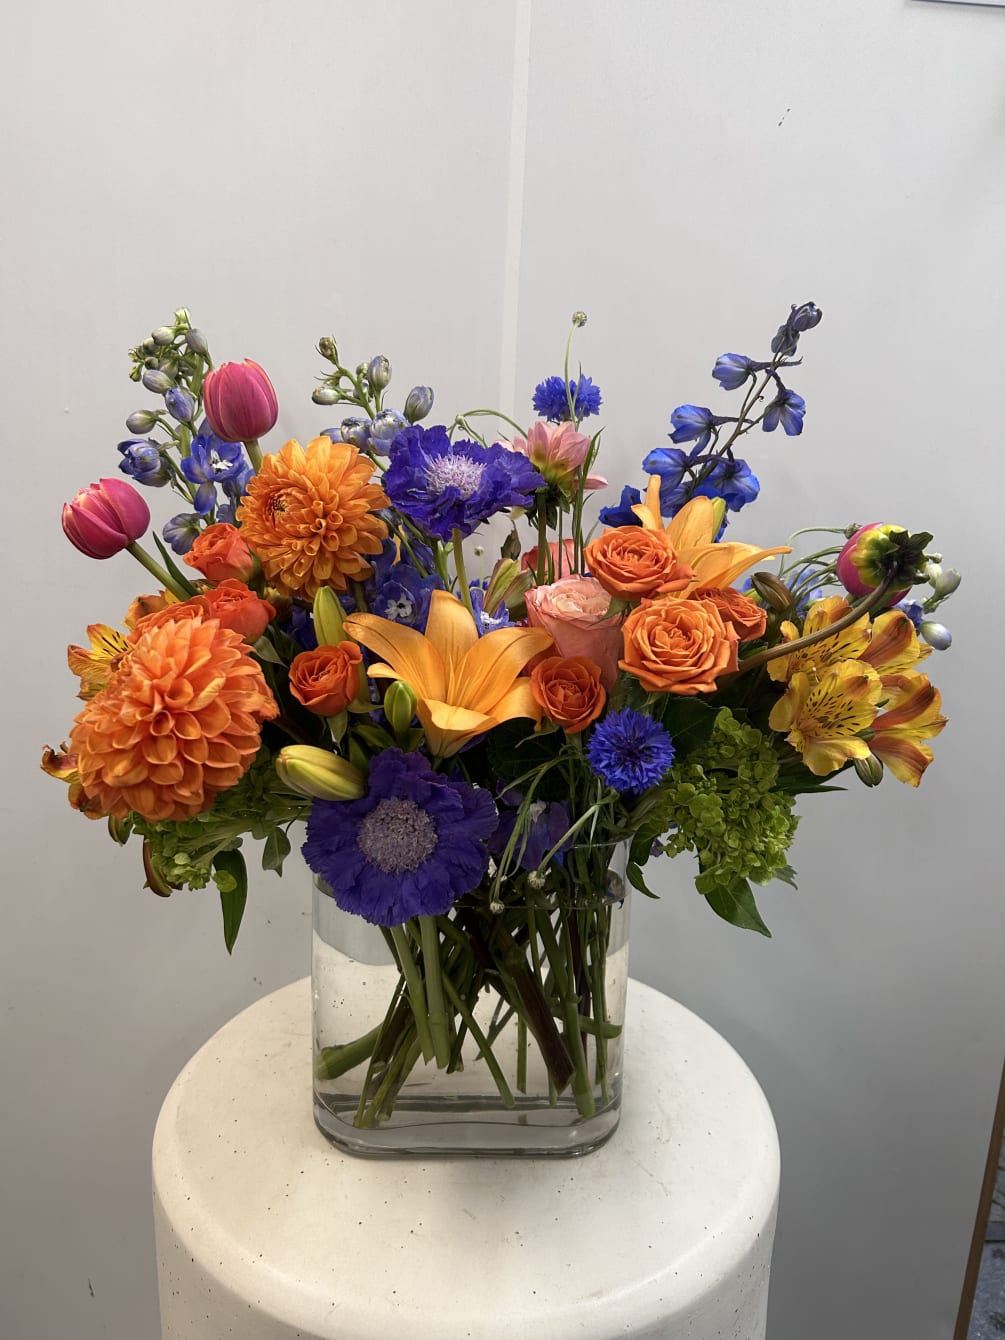 A beautiful complimentary combination of bold oranges and blues. Created in a